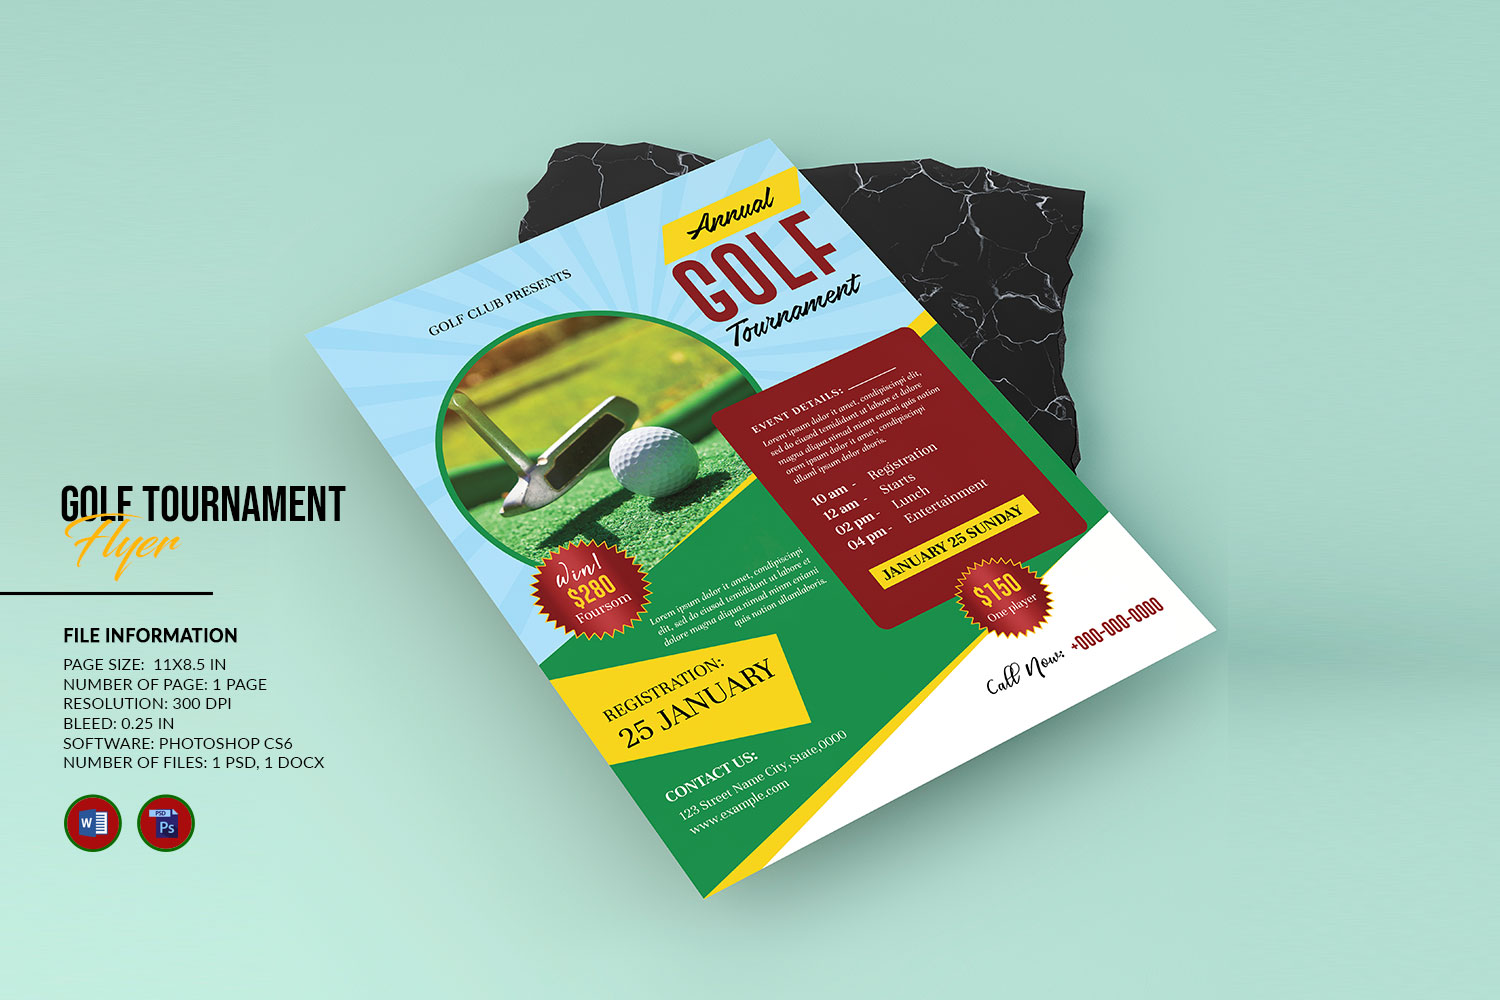 Printable Golf Tournament Flyer Template. Photoshop, Word and Canva